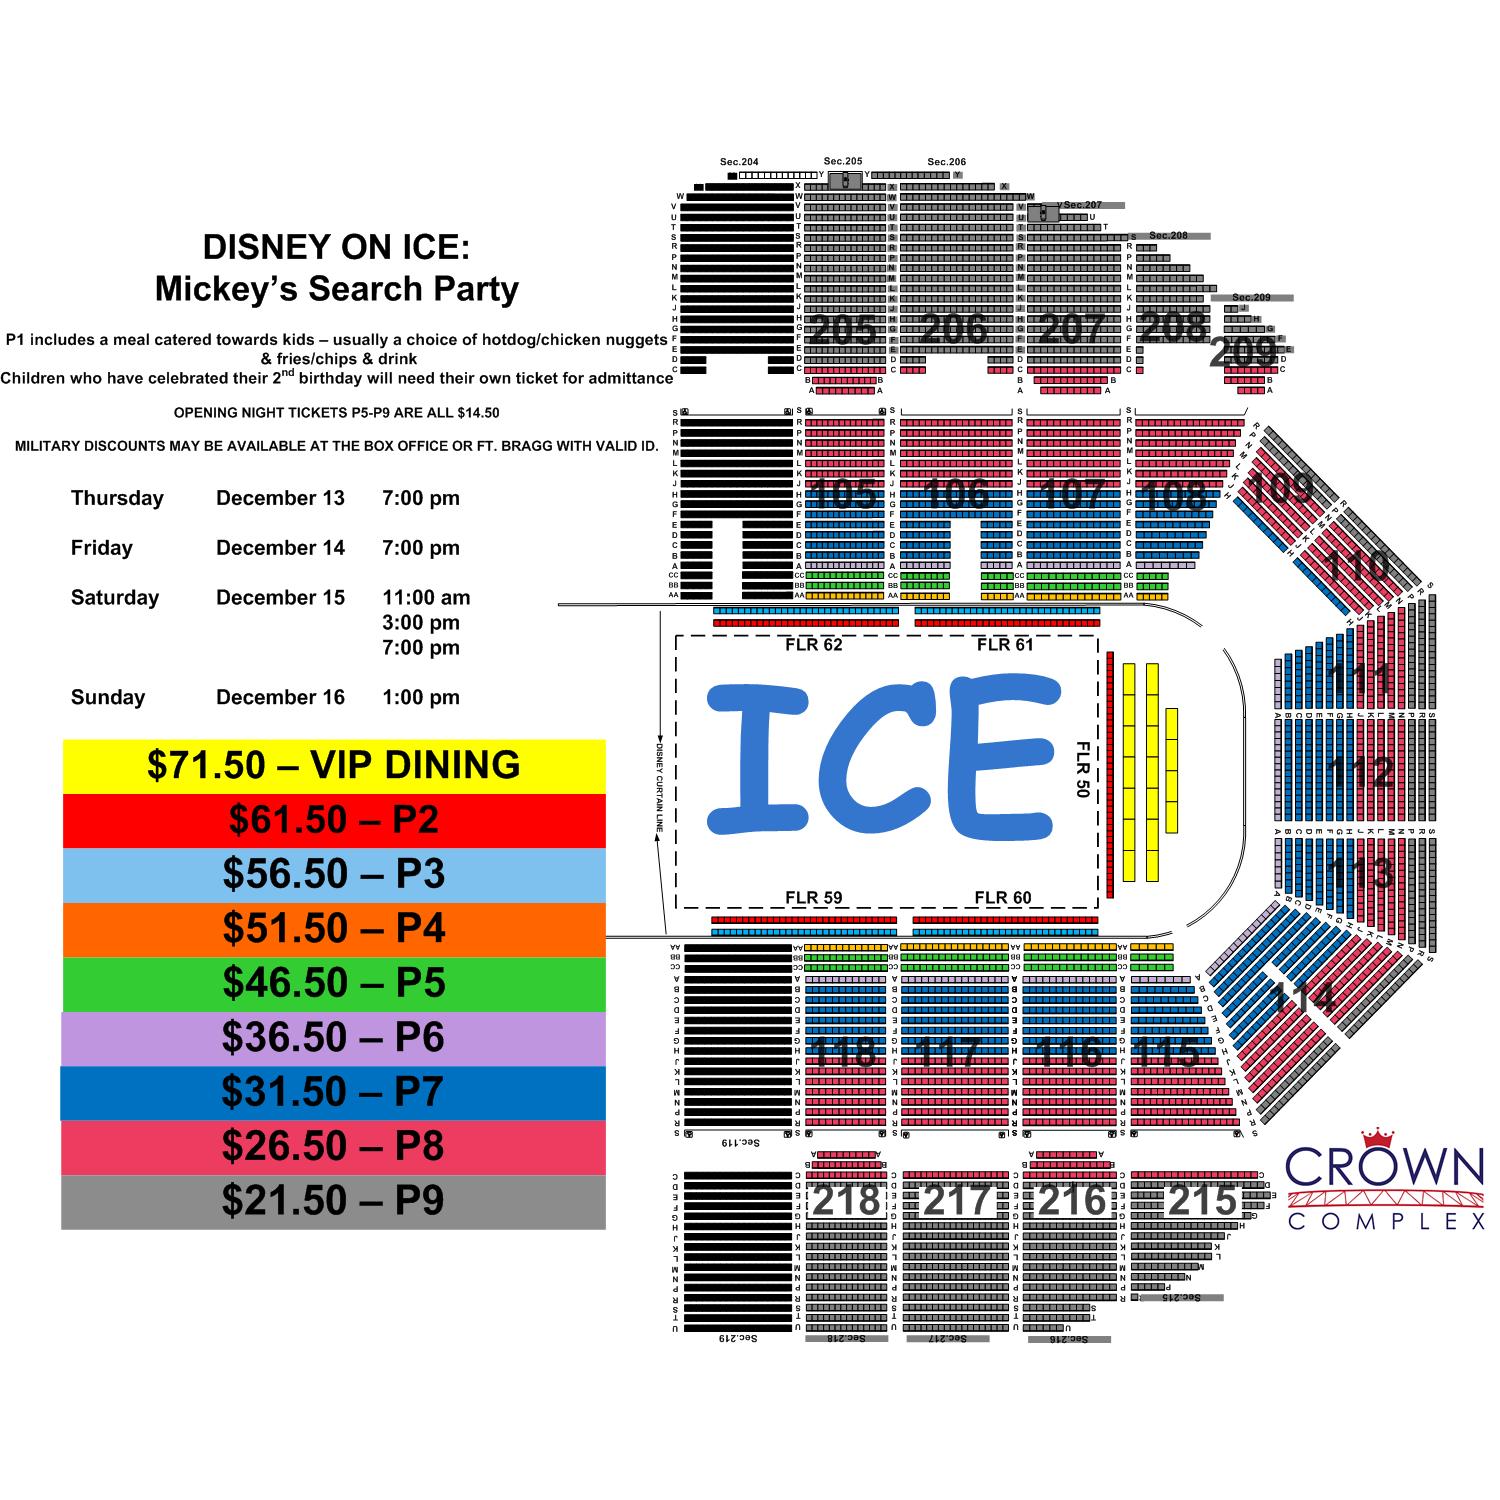 Crown Coliseum Concert Seating Chart